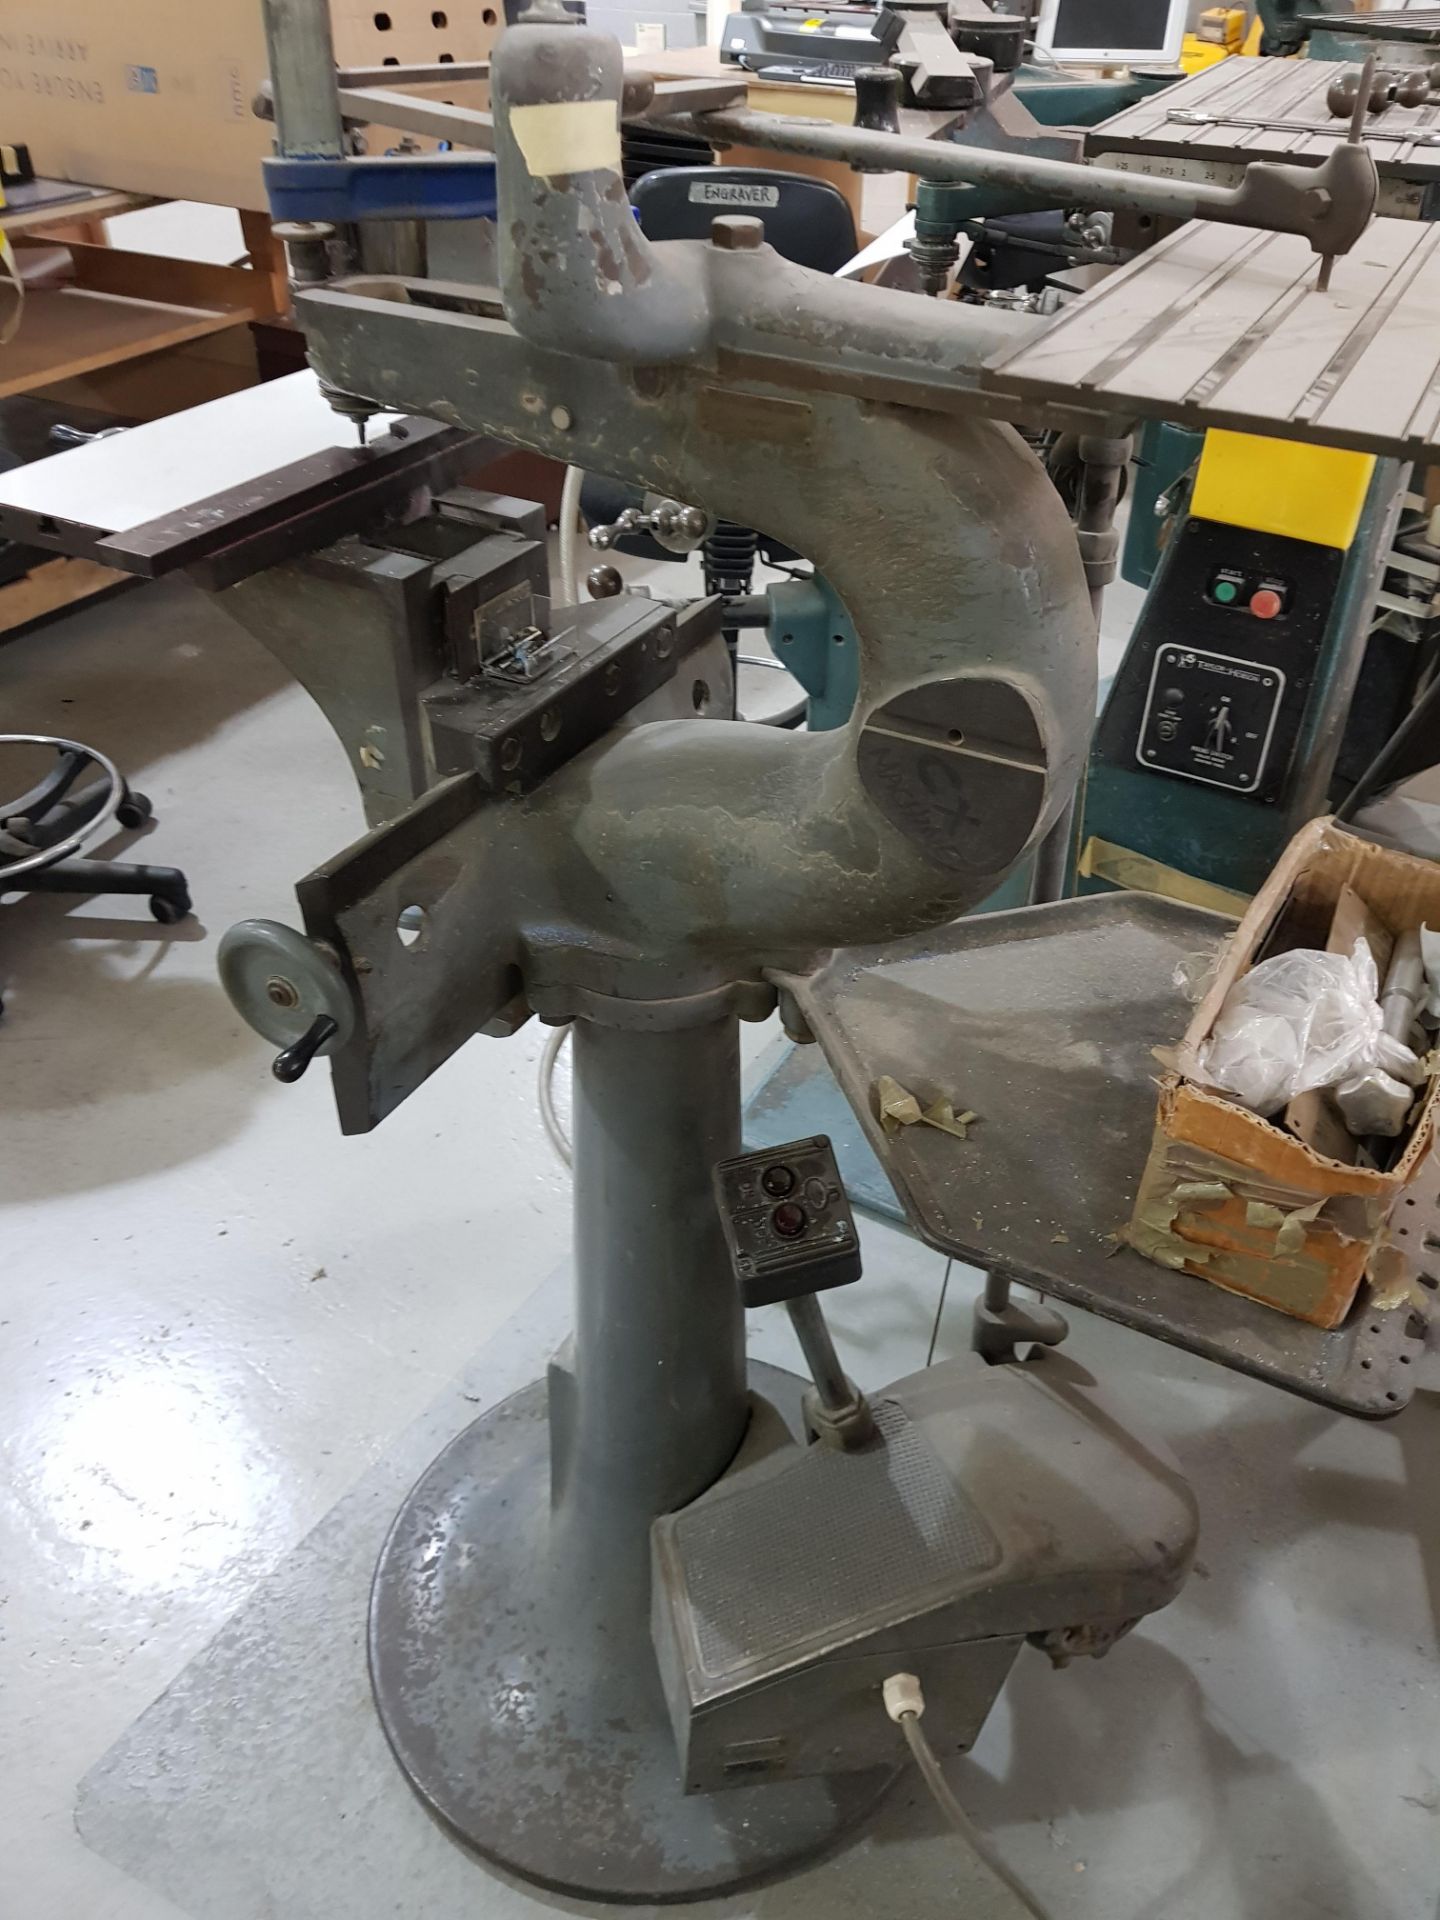 1 X TAYLOR HOBSON PEDESTAL MANUAL PANTOGRAPH ENGRAVING MACHINE. (ASSETS LOCATED IN DENTON, - Image 3 of 3